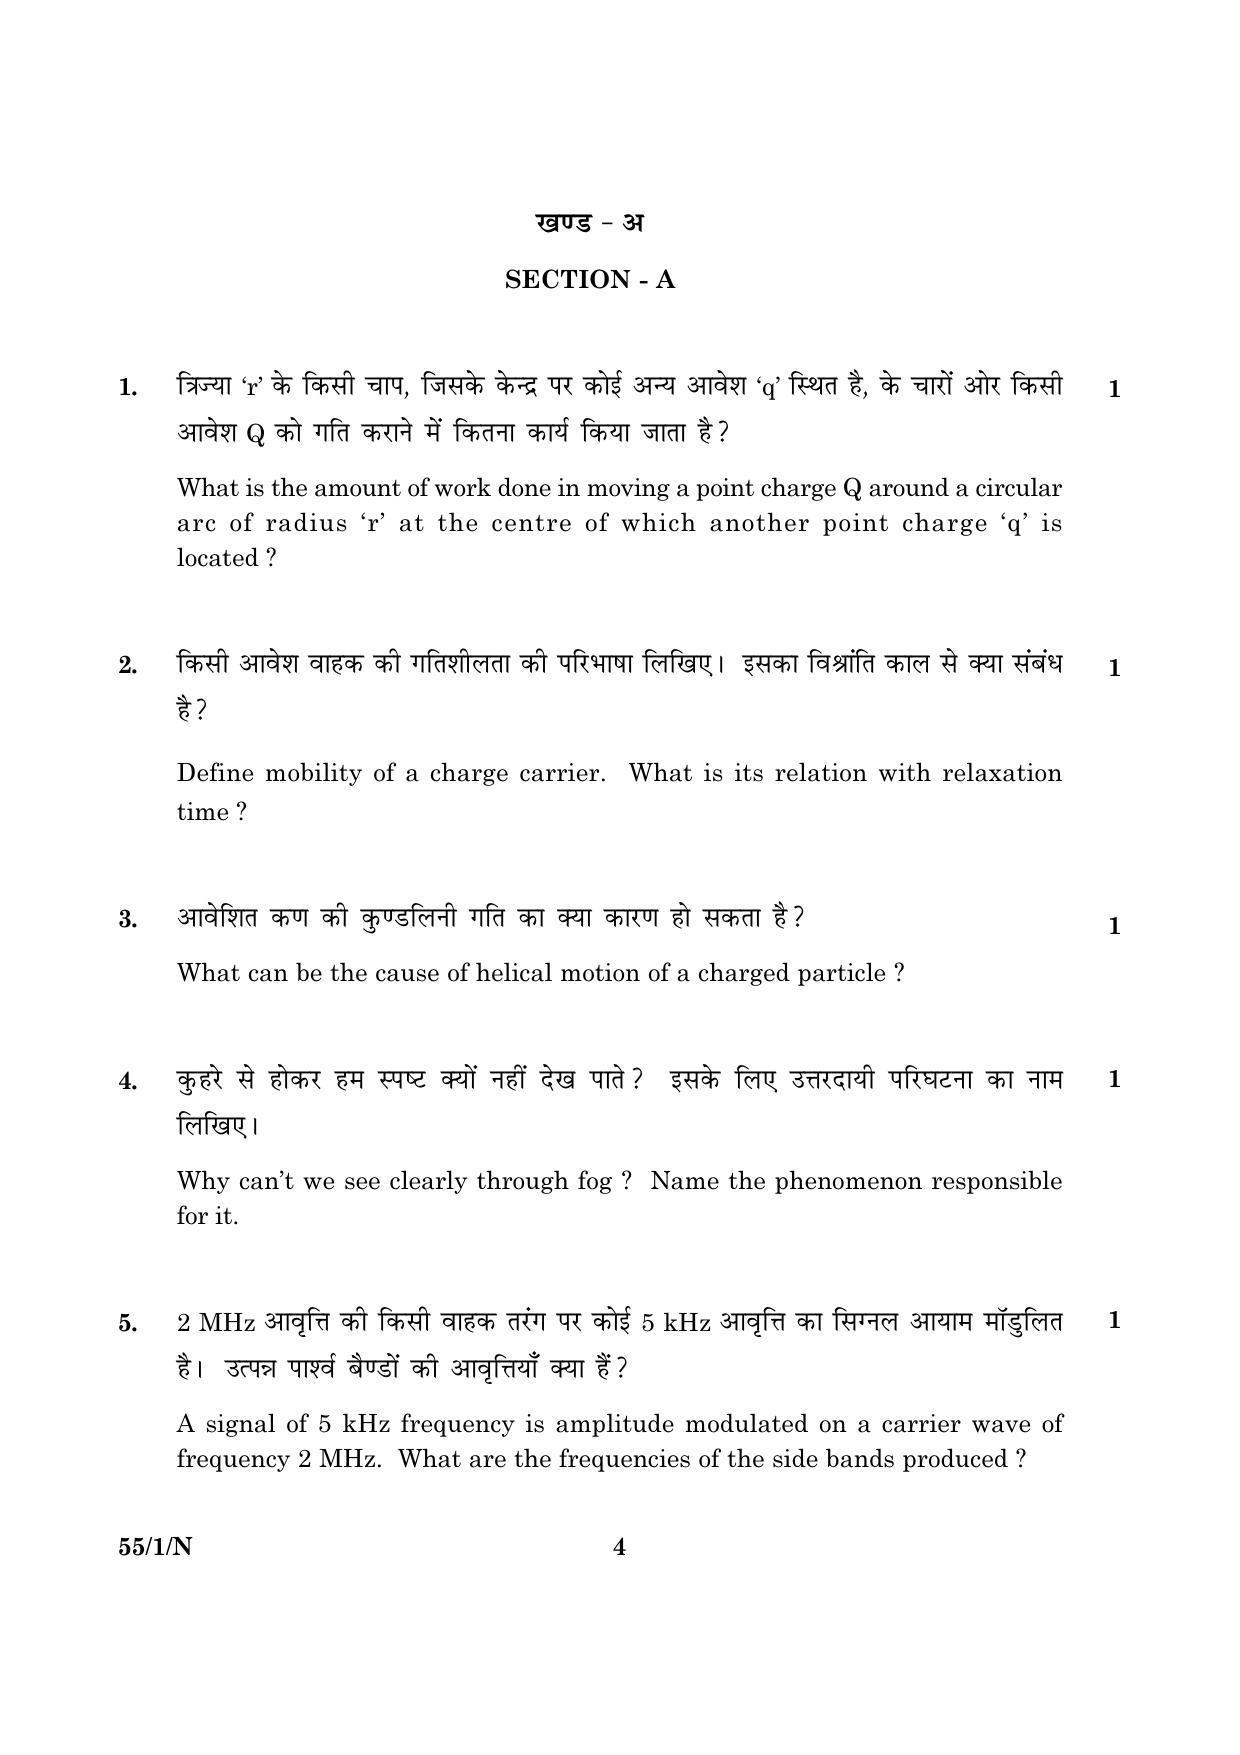 CBSE Class 12 055 Set 1 N Physics Theory 2016 Question Paper - Page 4